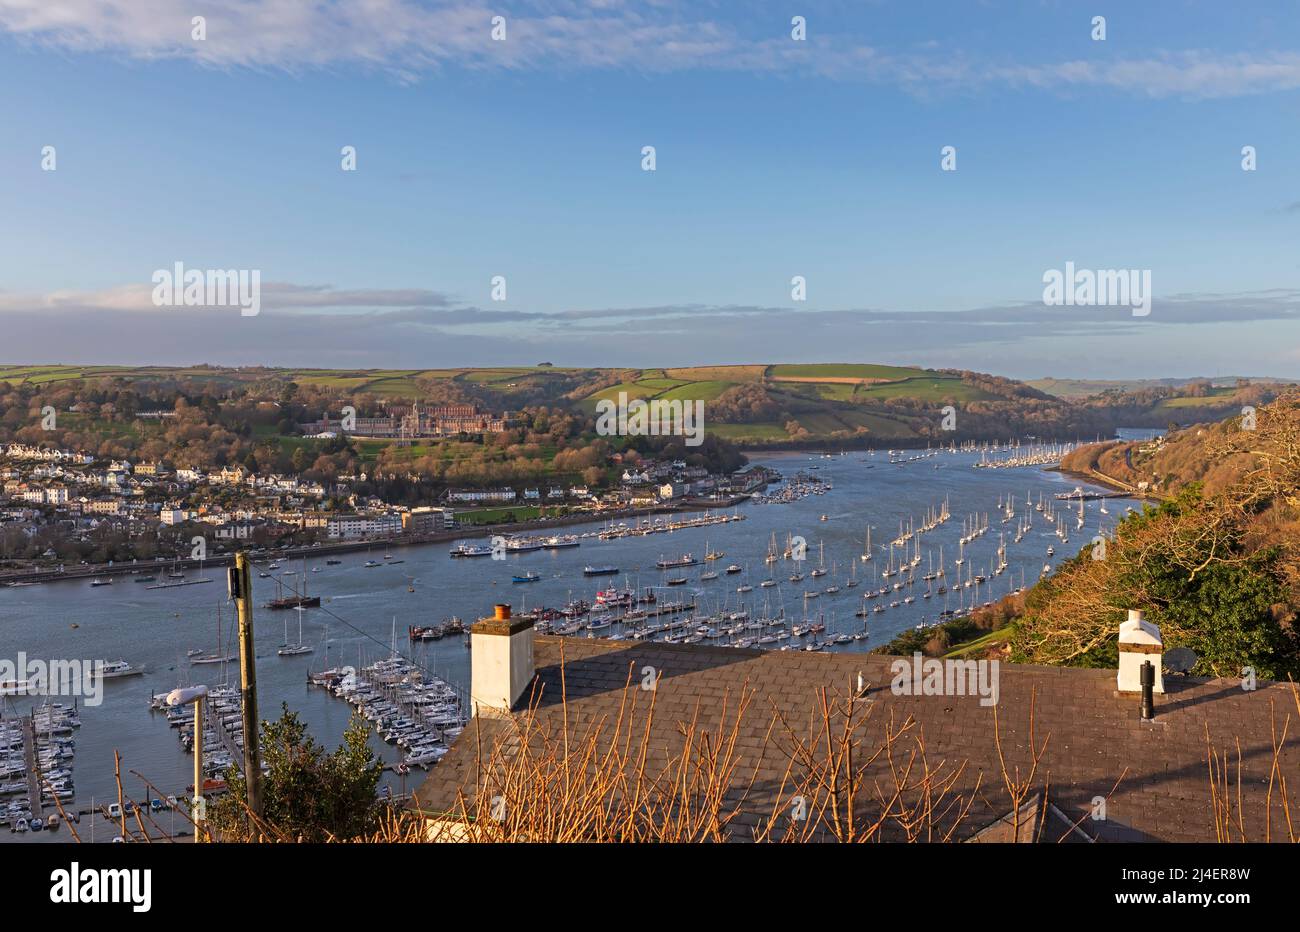 Dartmouth and the River Dart from Kingswear, South Hams, Devon. Sailboats are docked in the marina and moored in the tidal river. Stock Photo